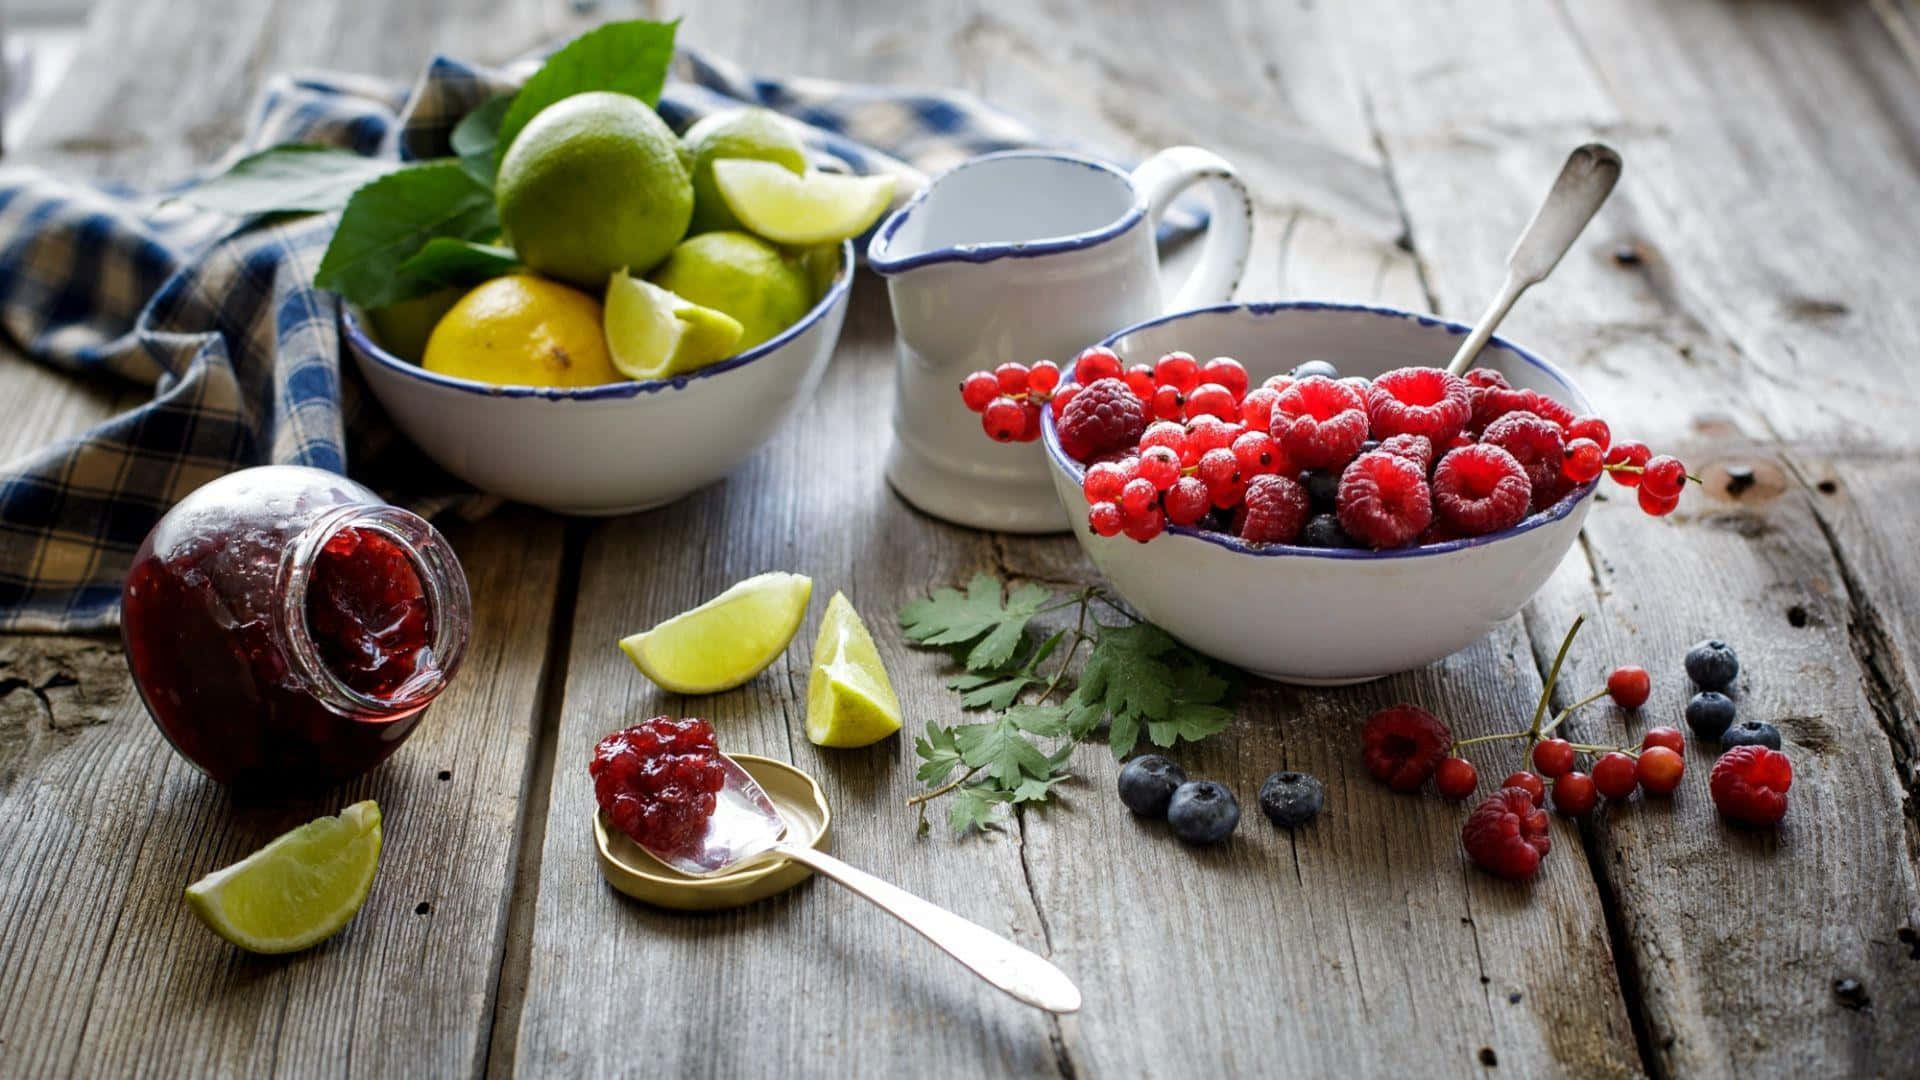 Healthy Food Fruits And Jam Picture